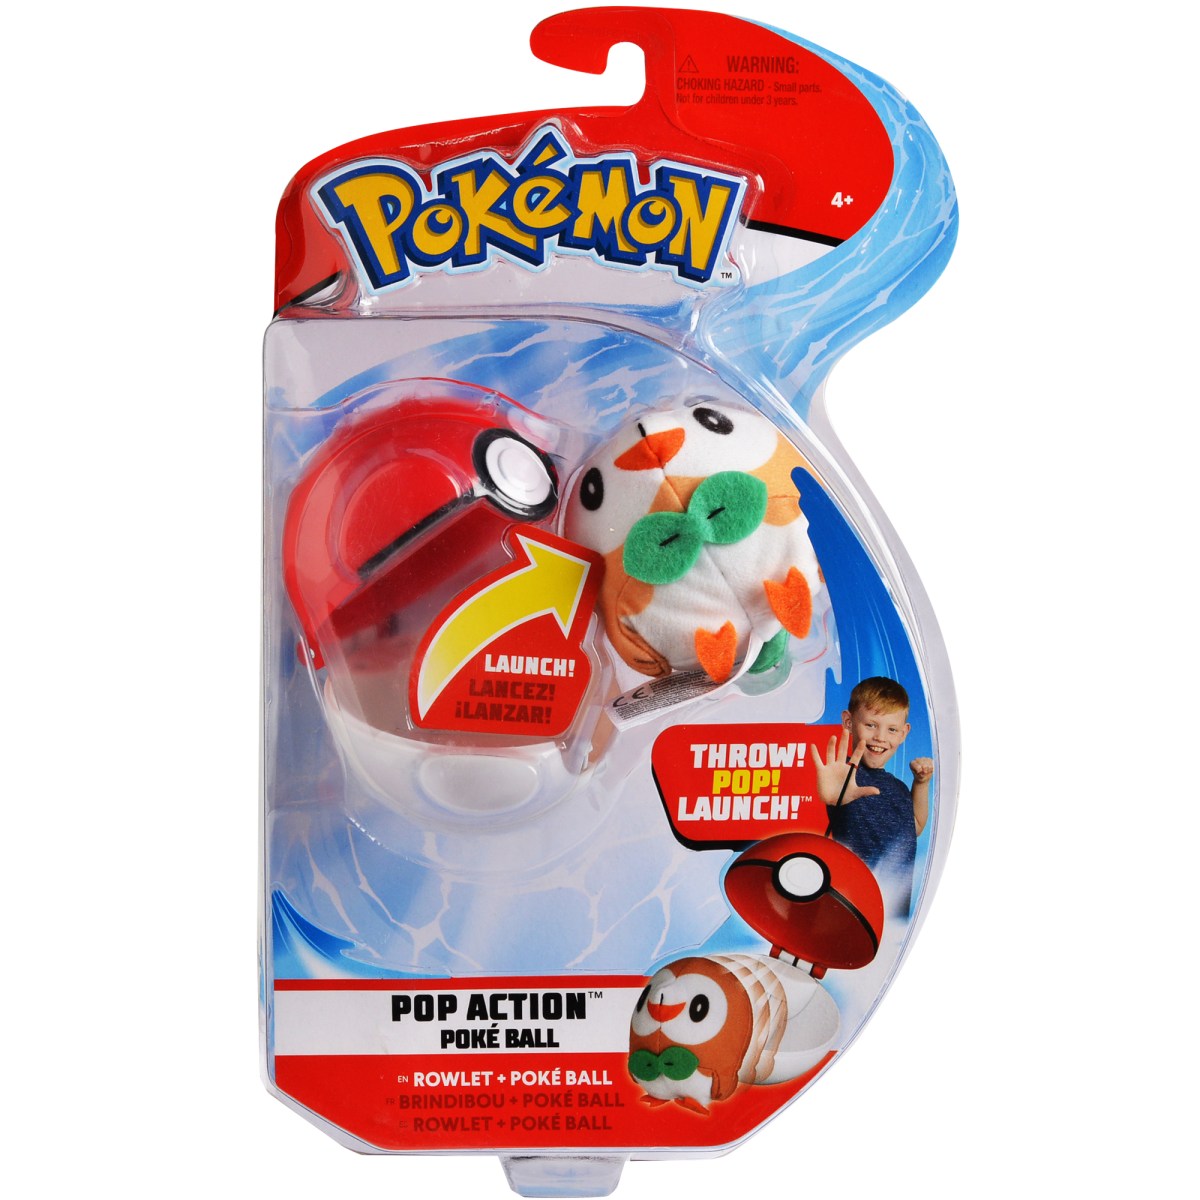 Picture of the Launchable Rowlet toy